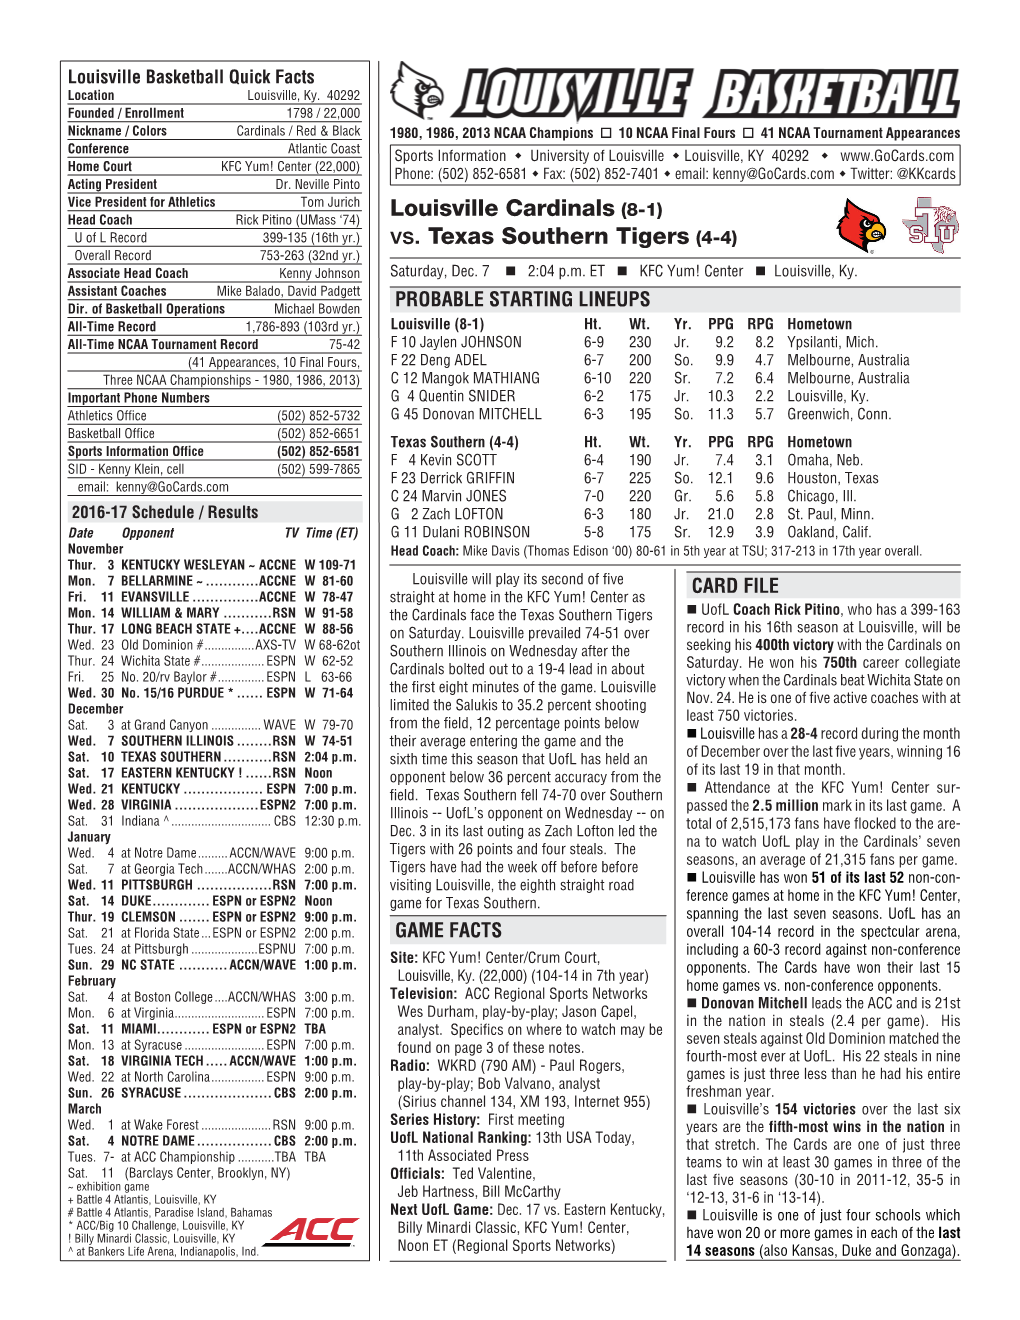 Louisville Cardinals (8-1) Vs. Texas Southern Tigers (4-4)